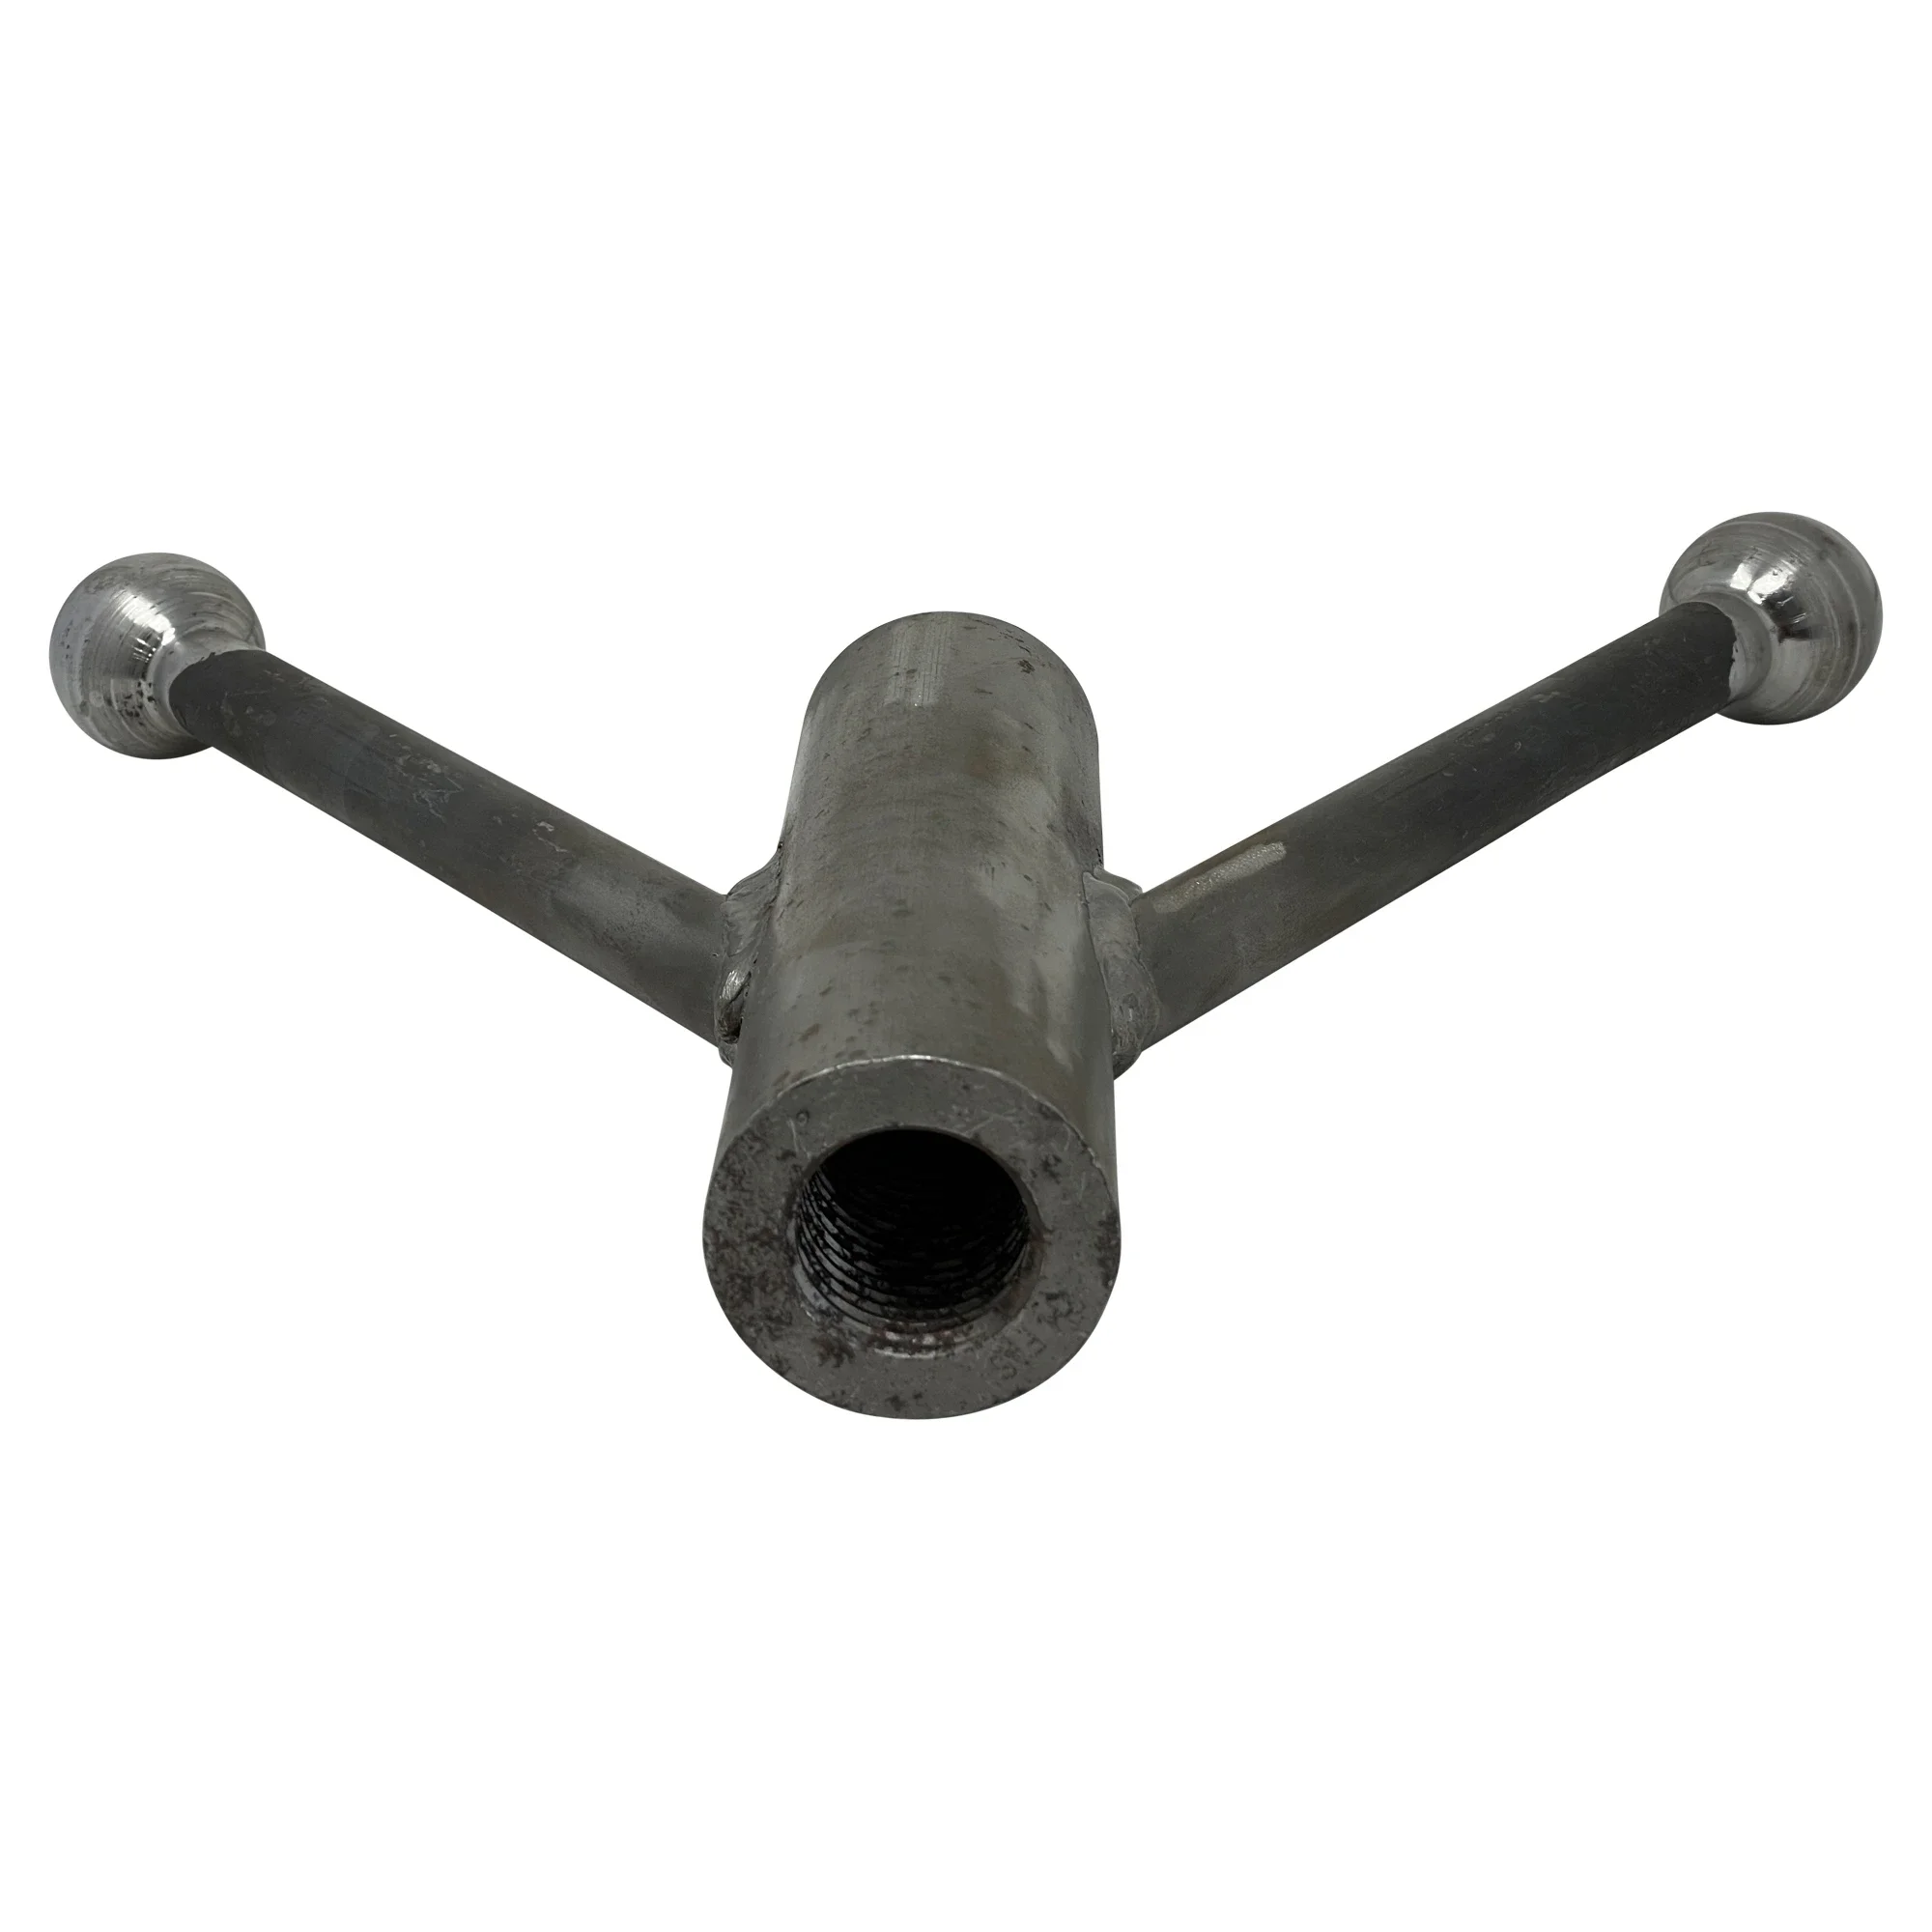 Wastebuilt® Replacement for Cusco Door - Wing Nut Forged Capped End